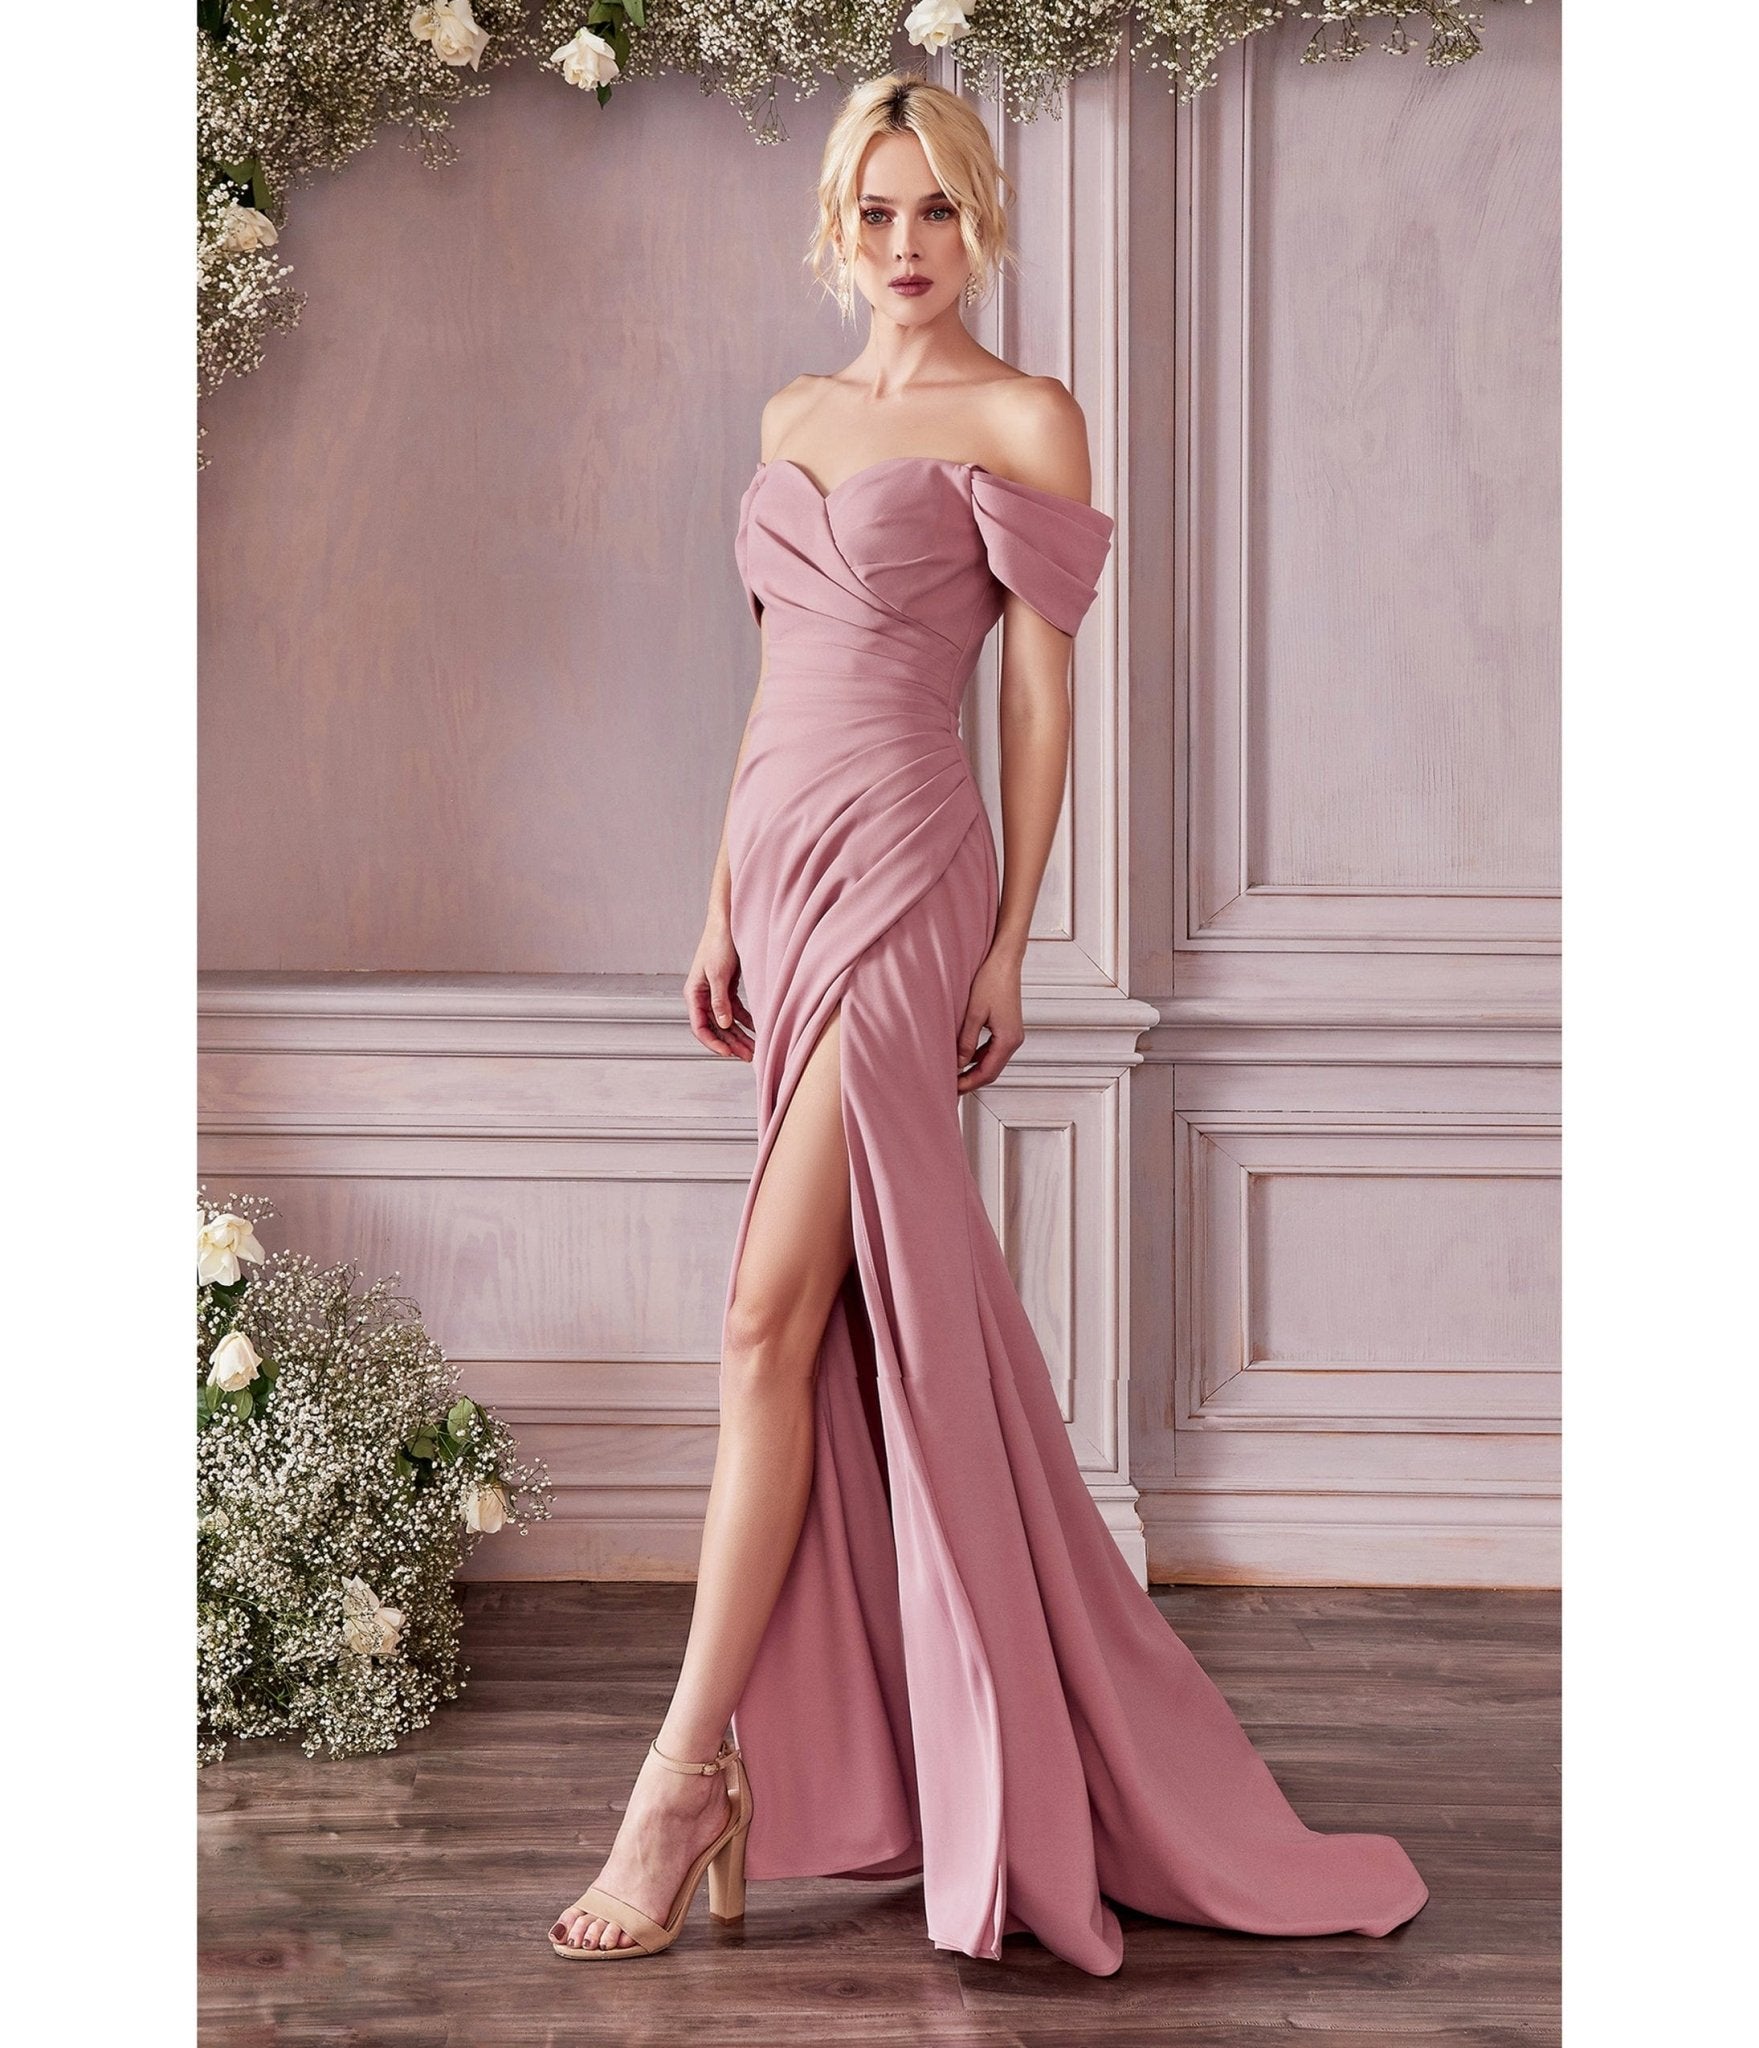 Thoughts of Hue Blush Surplice Maxi Dress